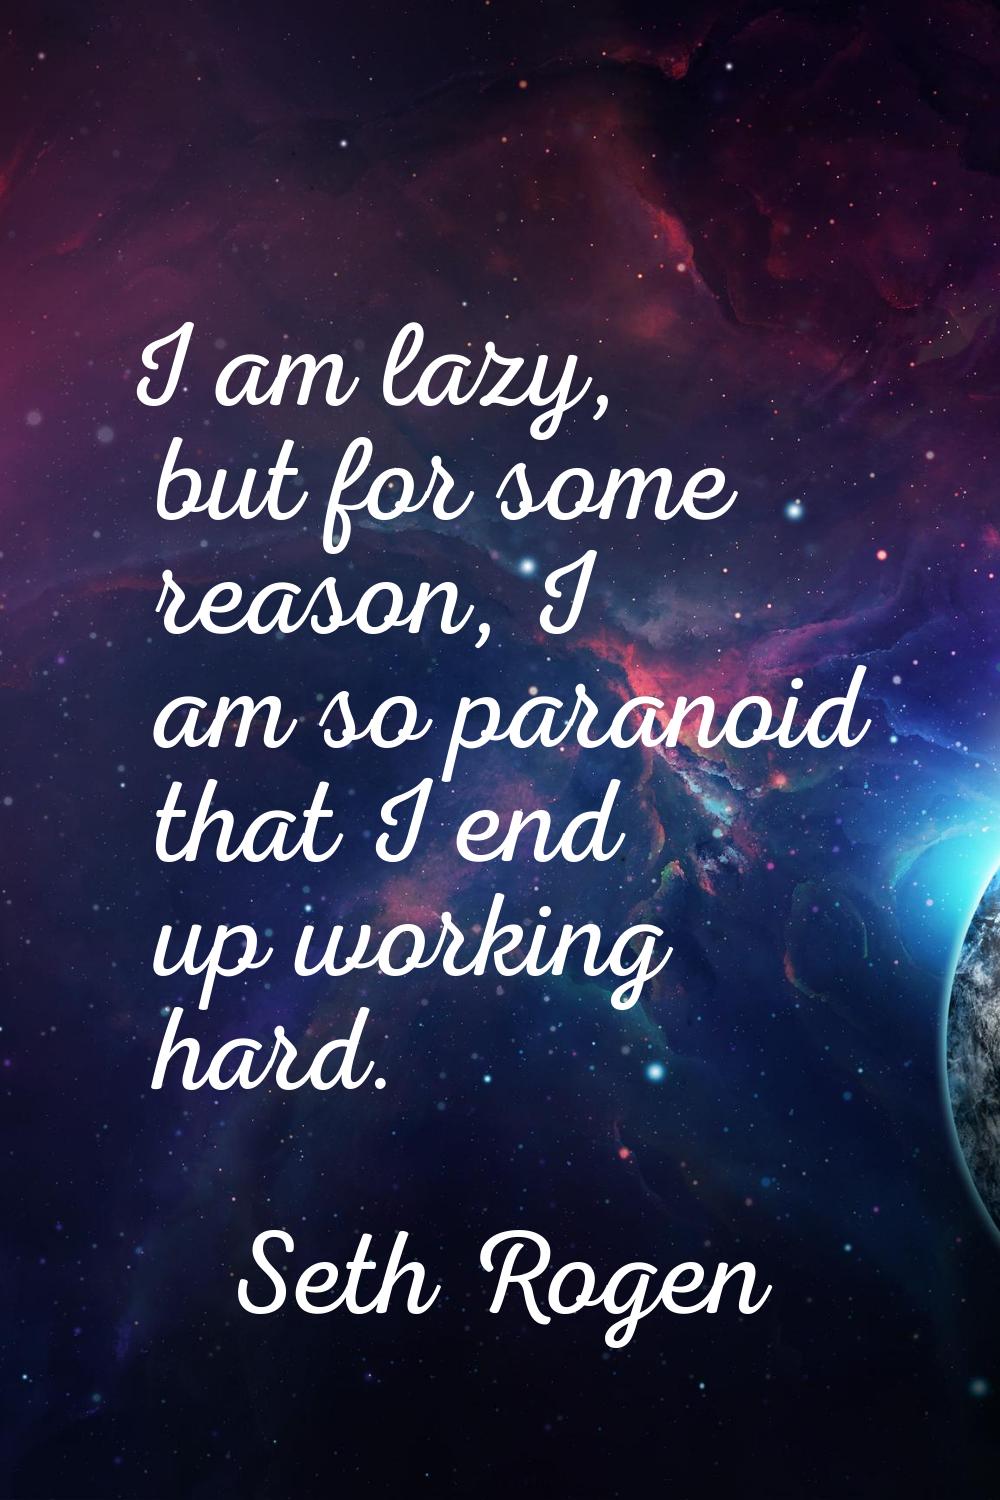 I am lazy, but for some reason, I am so paranoid that I end up working hard.